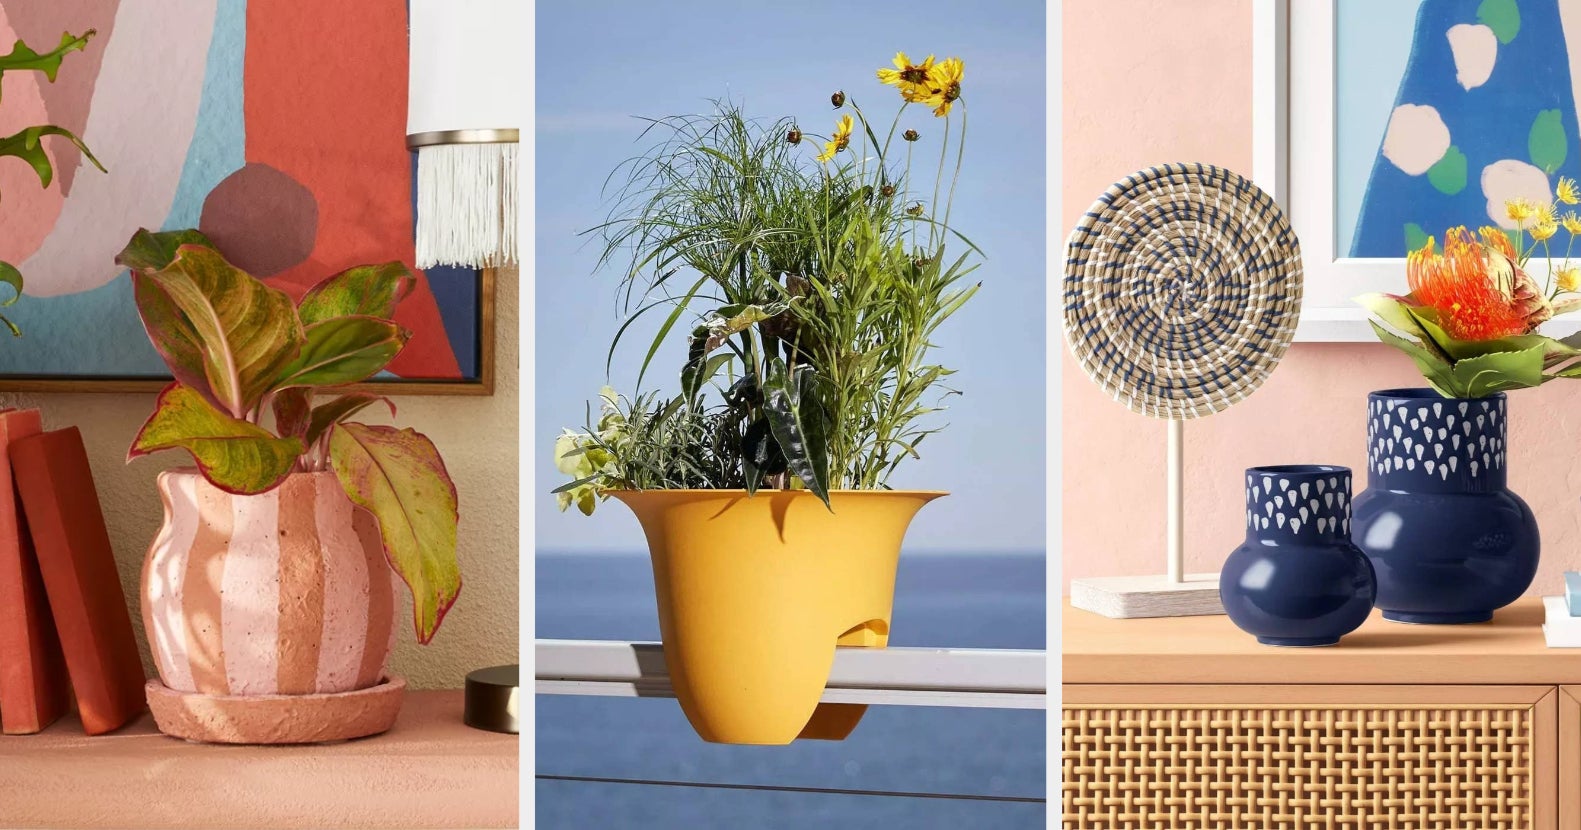 31 Things From Target To Add More Greenery To Your Home